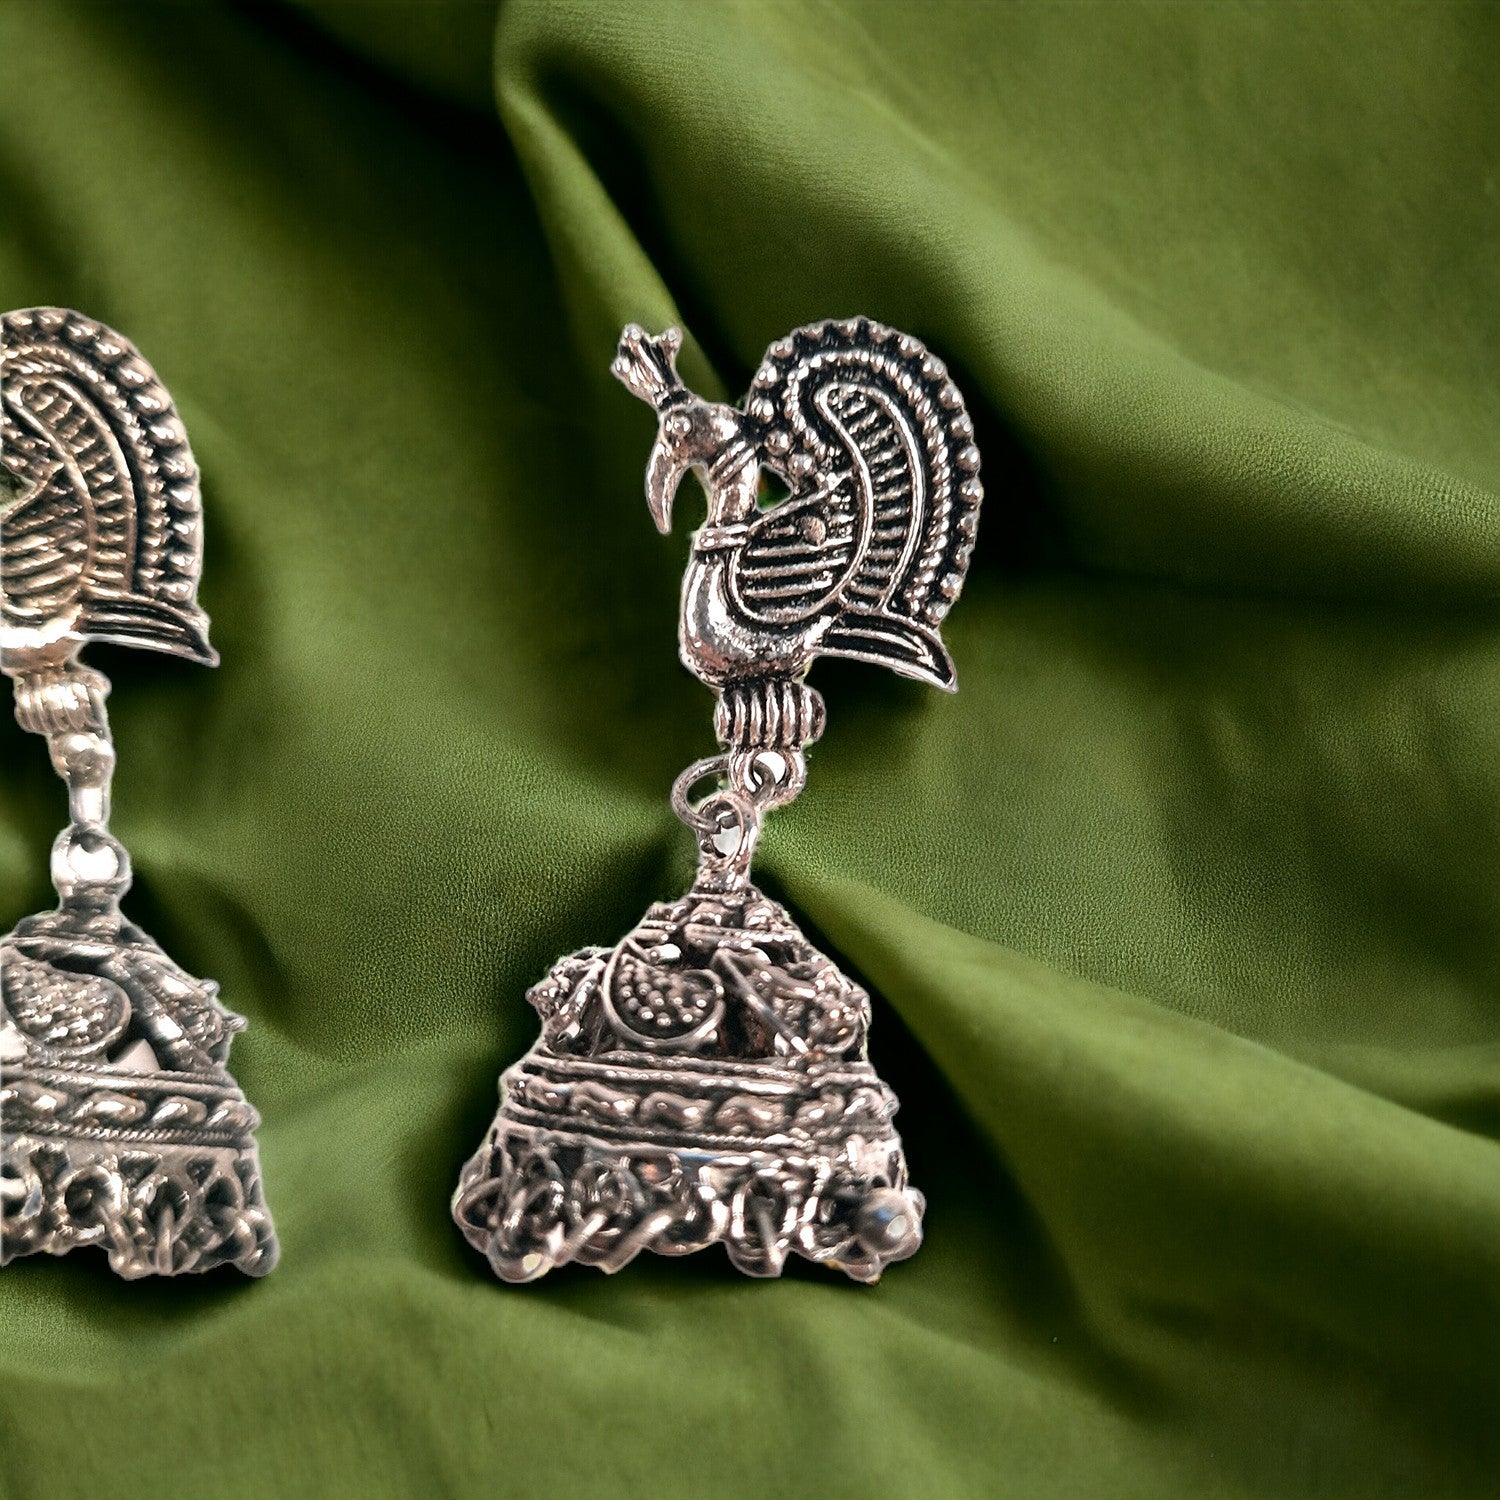 Jhumka Earrings Oxidised Silver Plated for Girls and Women - Peacock Design | Traditional Jewellery | Gifts for Her, Friendship Day, Valentine's Day Gift - Apkamart